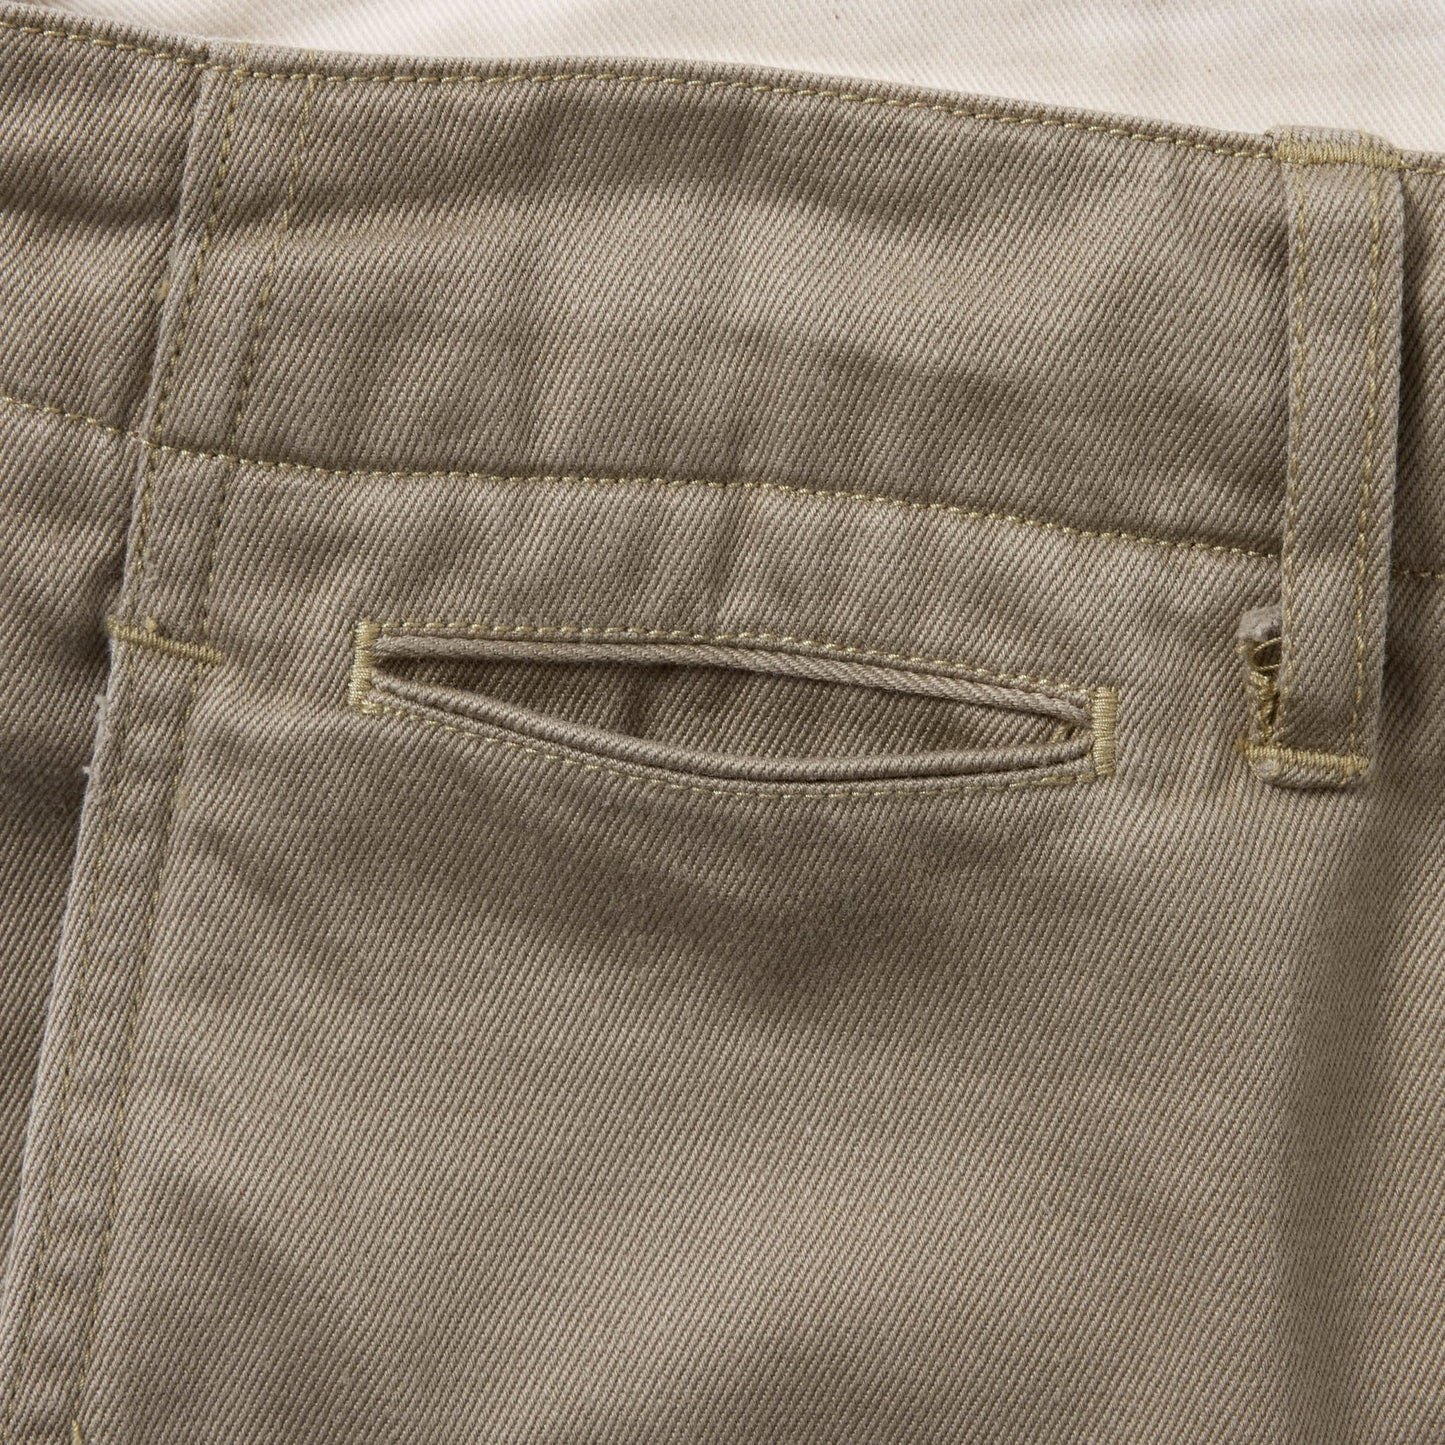 GOLD SELVEDGE WEAPON WIDE TROUSERS